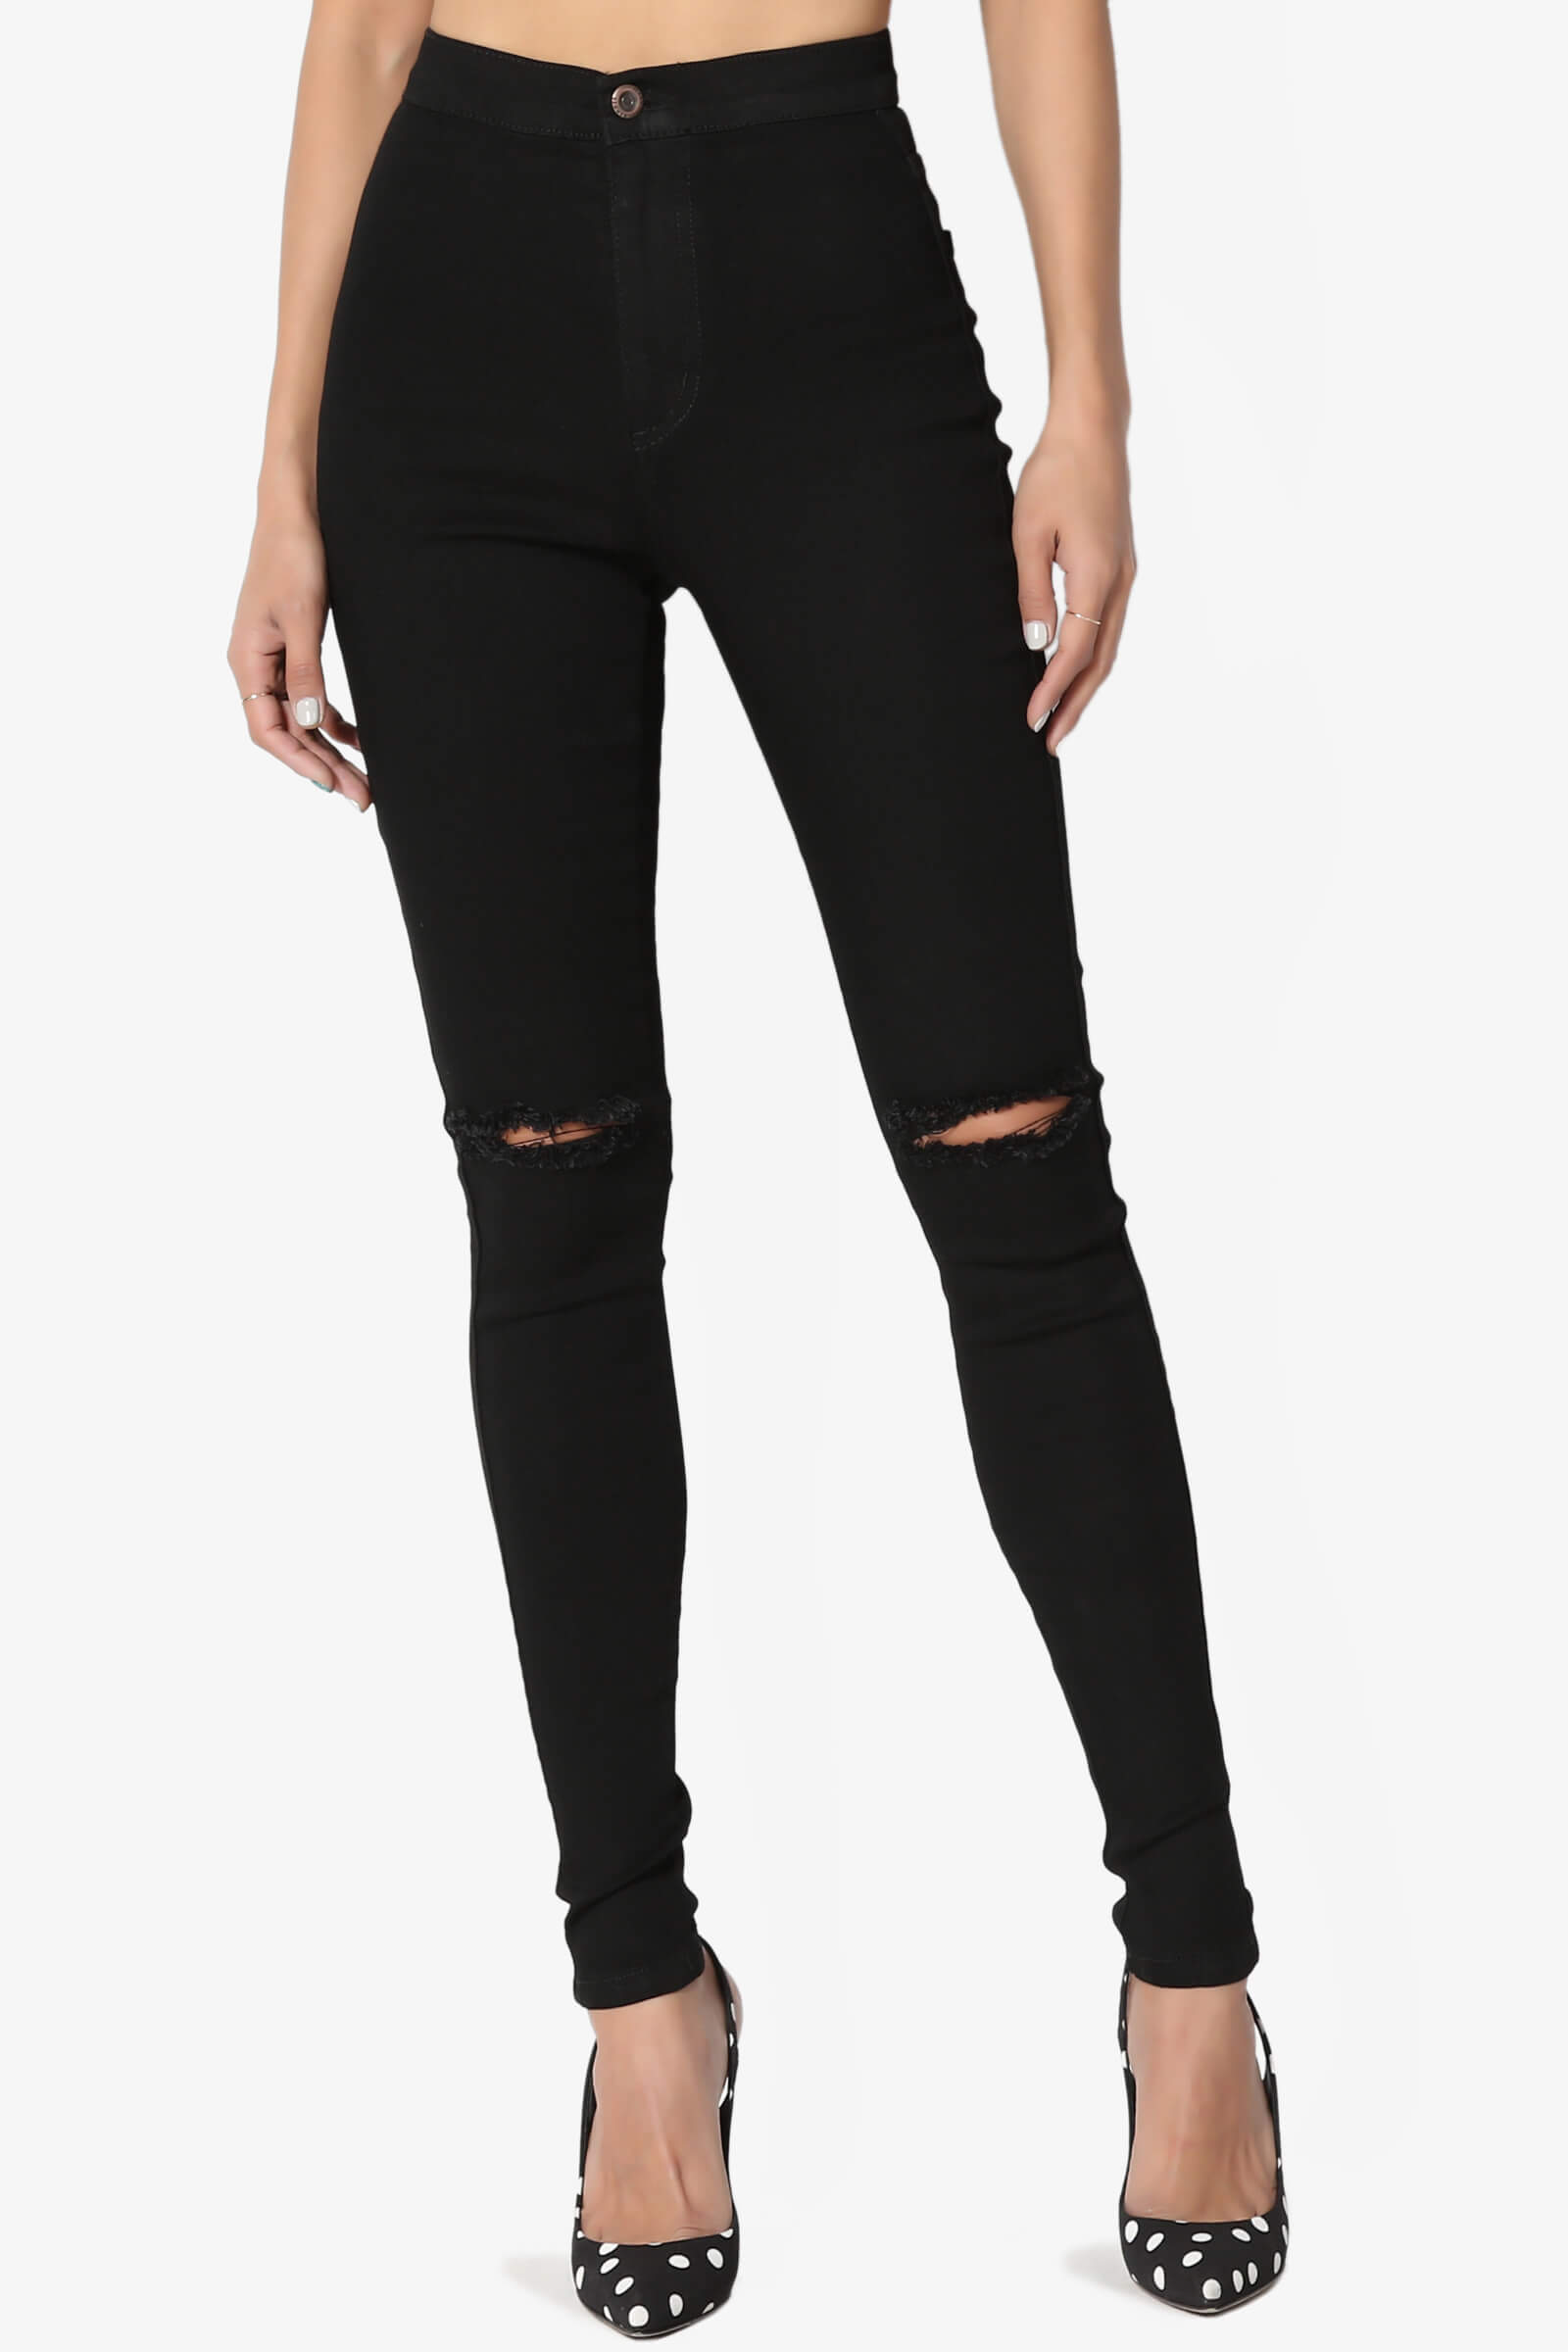 ladies high waisted black jeans